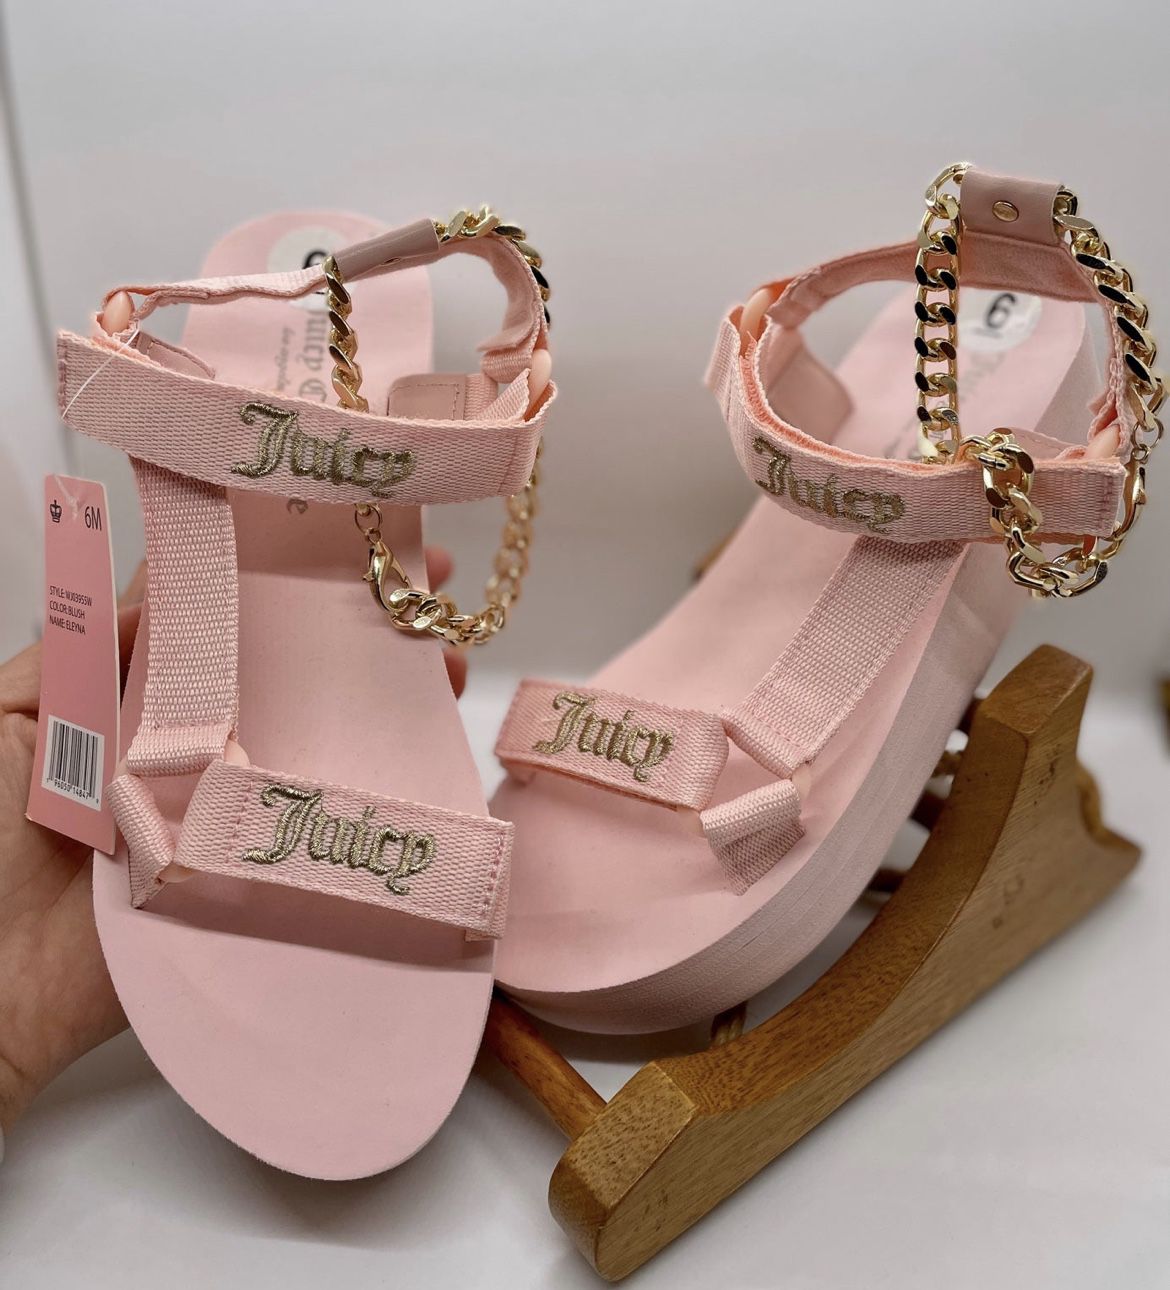 Juicy Couture Eleyna Chain Platform Sandals for Sale in Pompano Beach, FL -  OfferUp